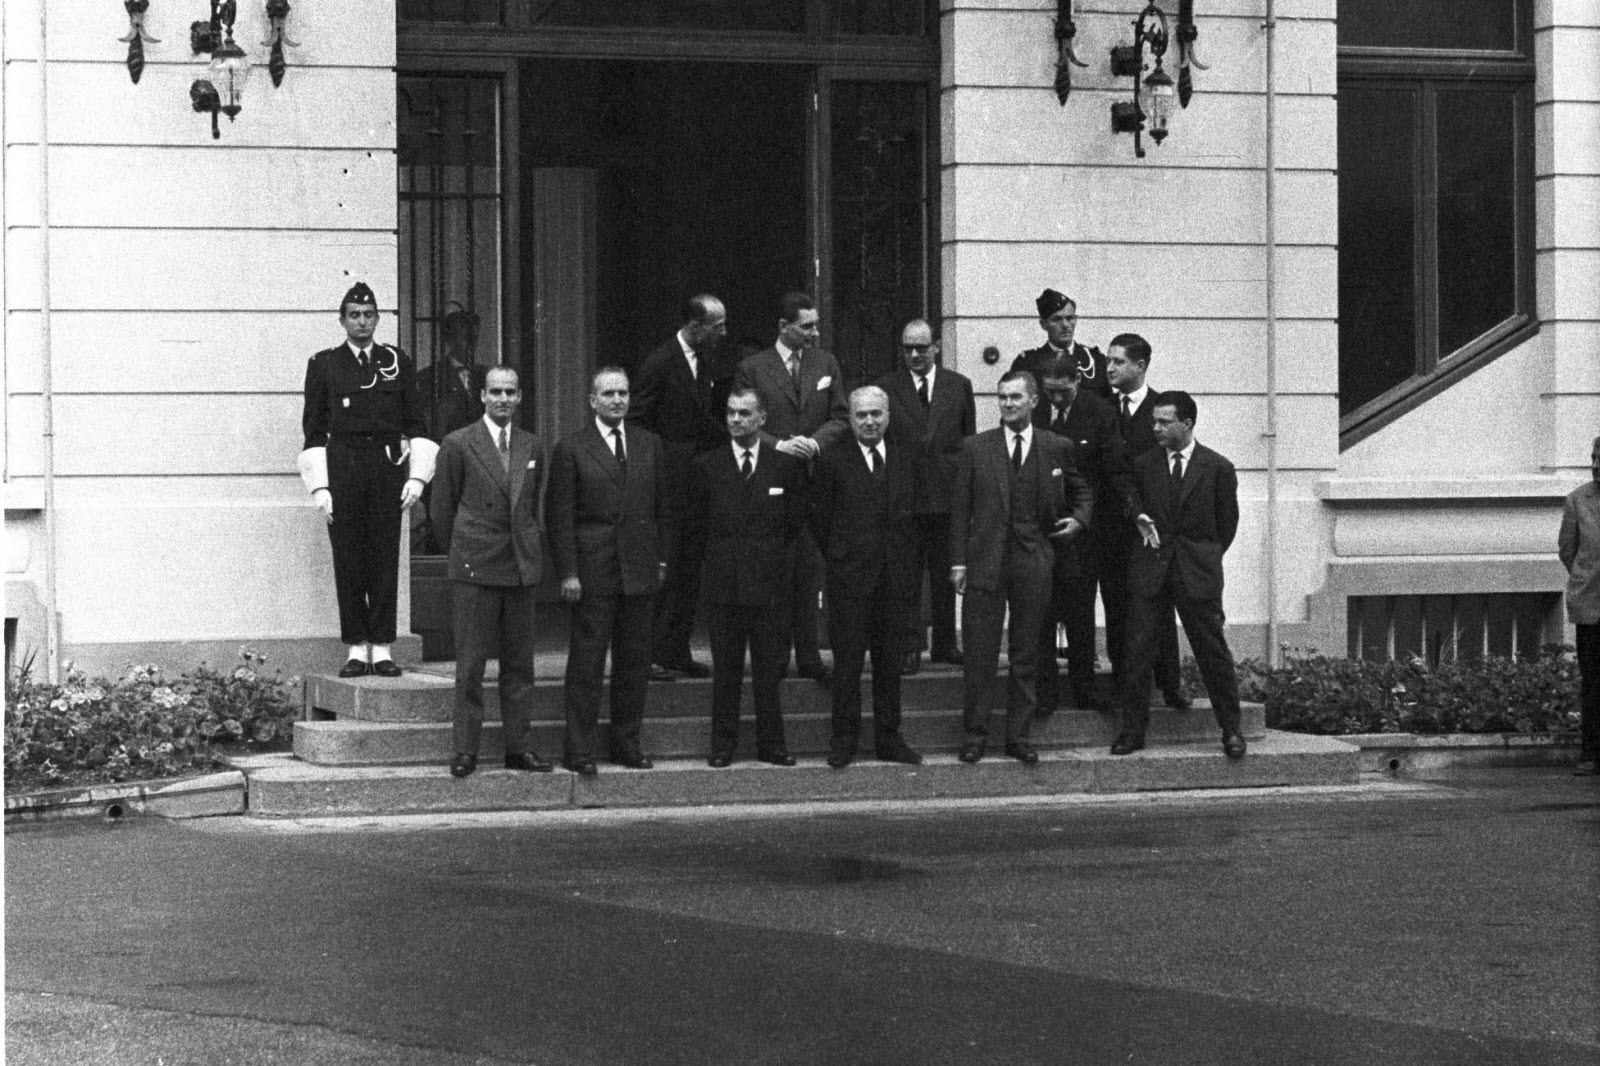 On May 20, 1961, the negotiations for the Evian Accords began.